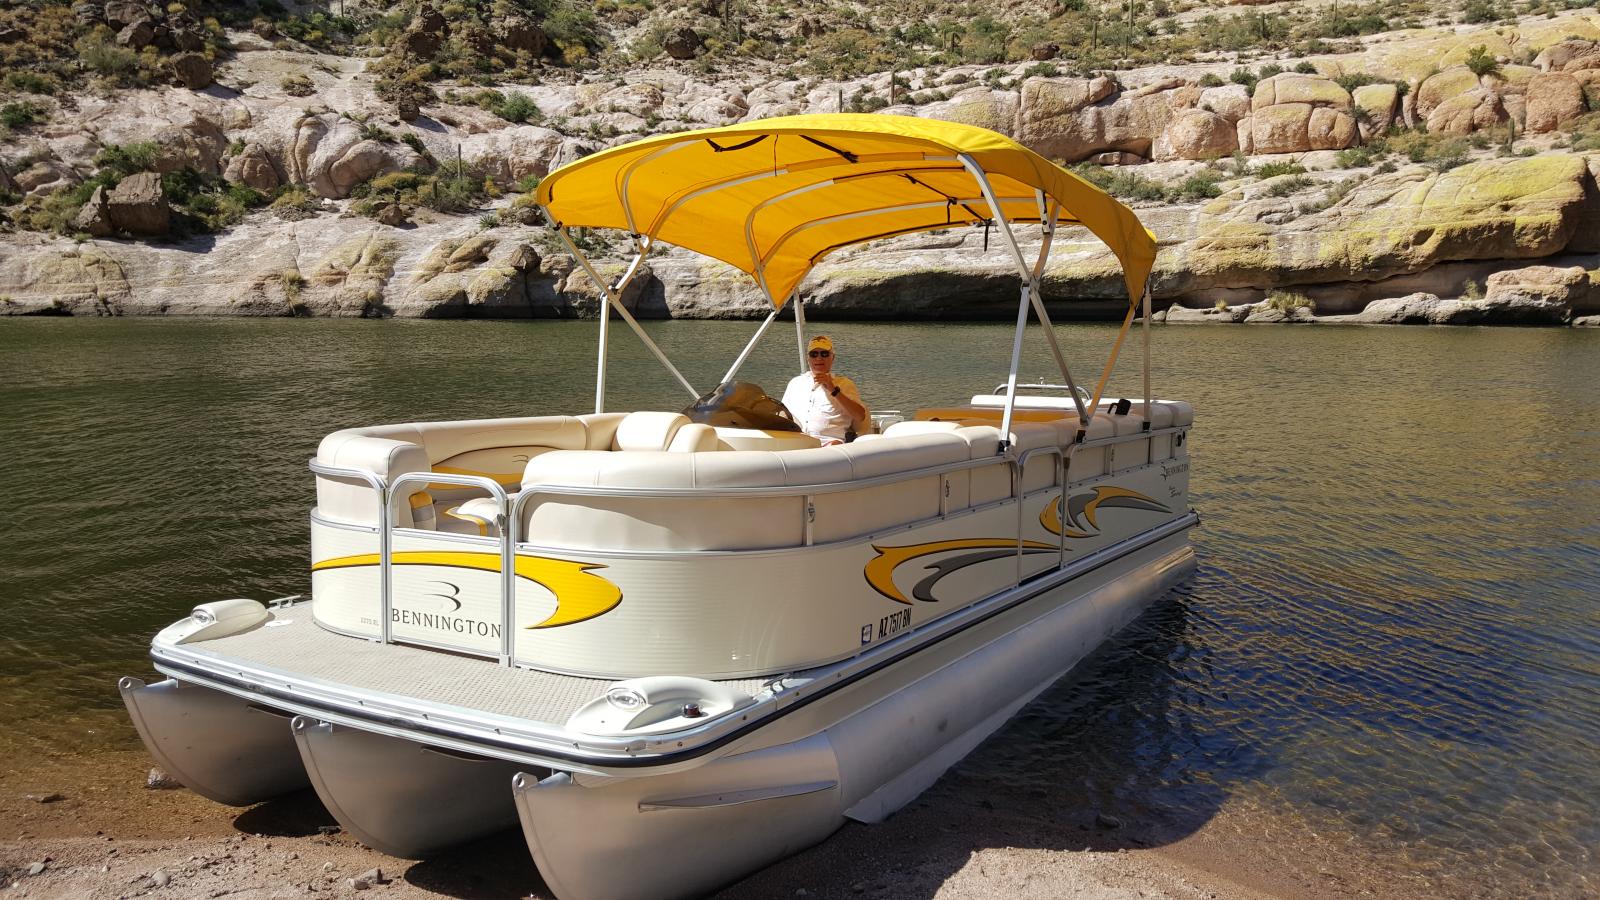 Me on Canyon Lake in Arizona.  Pontoons hold up better on the rocks than a fiberglass hull!